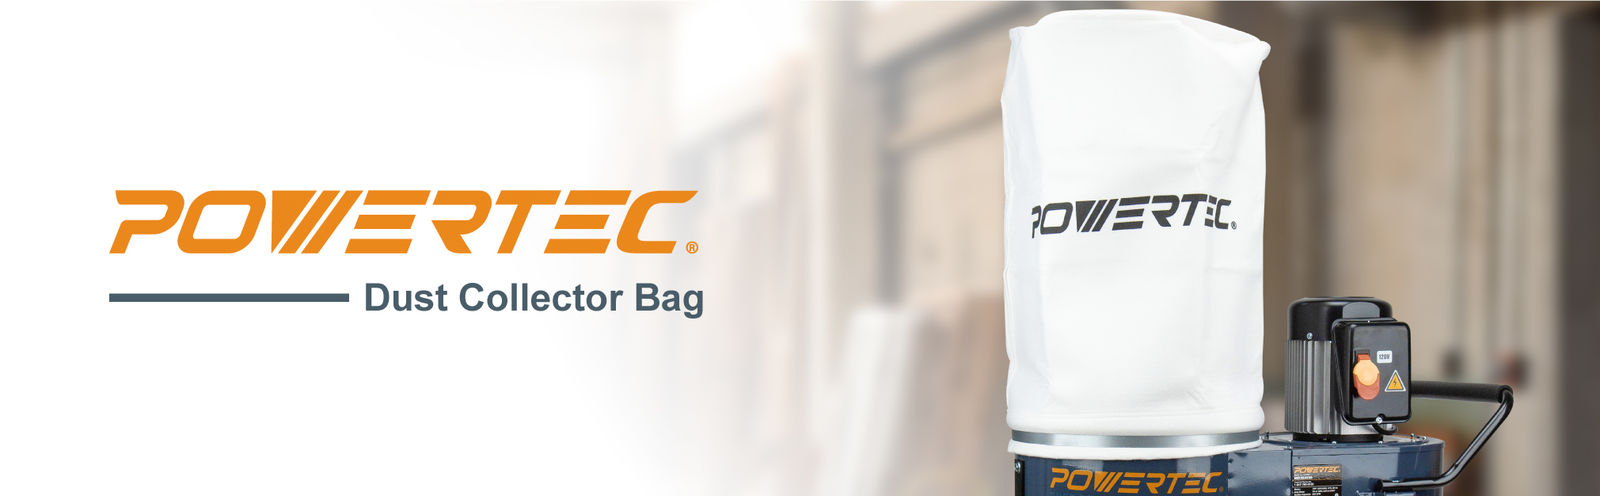 20 in 1 mircon dust collector bag x 31 in 